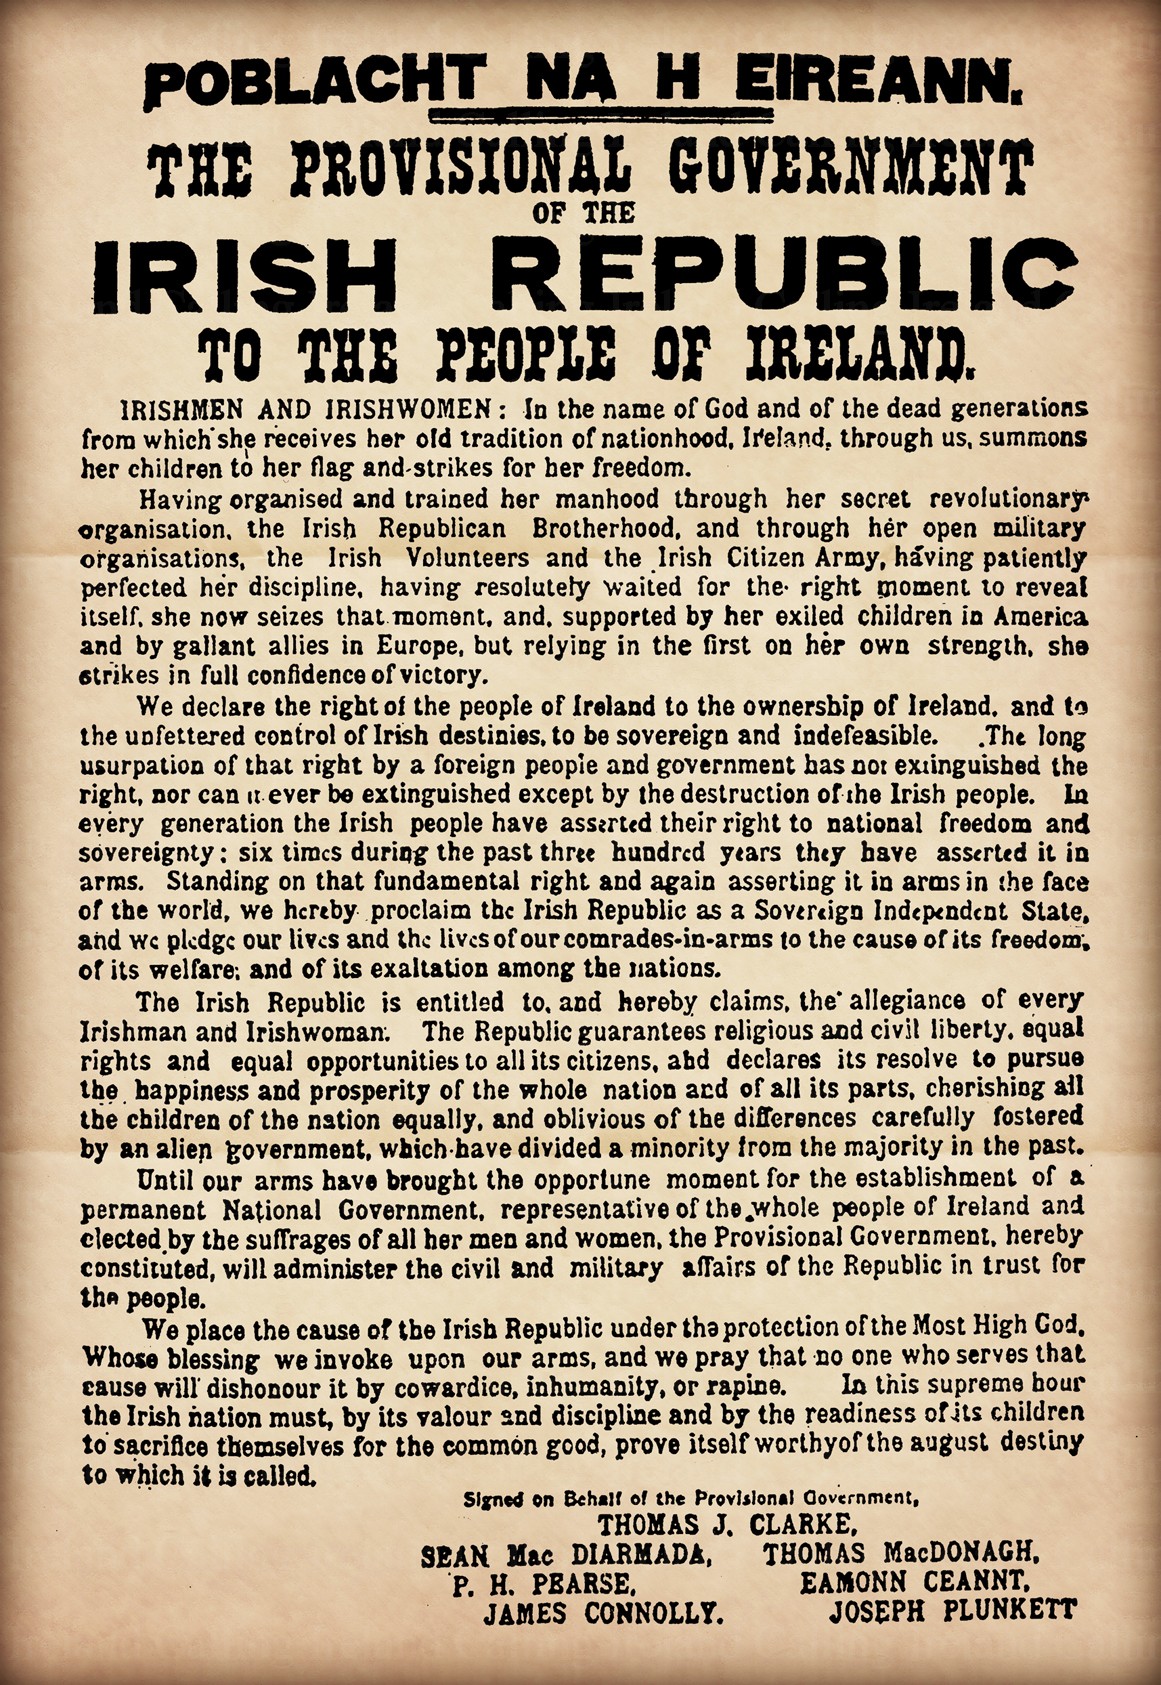 The 1916 Easter Rising in Dublin, Ireland, and Portraits of 14 IRISH LEADERS who were executed for proclaiming the Irish Republic.